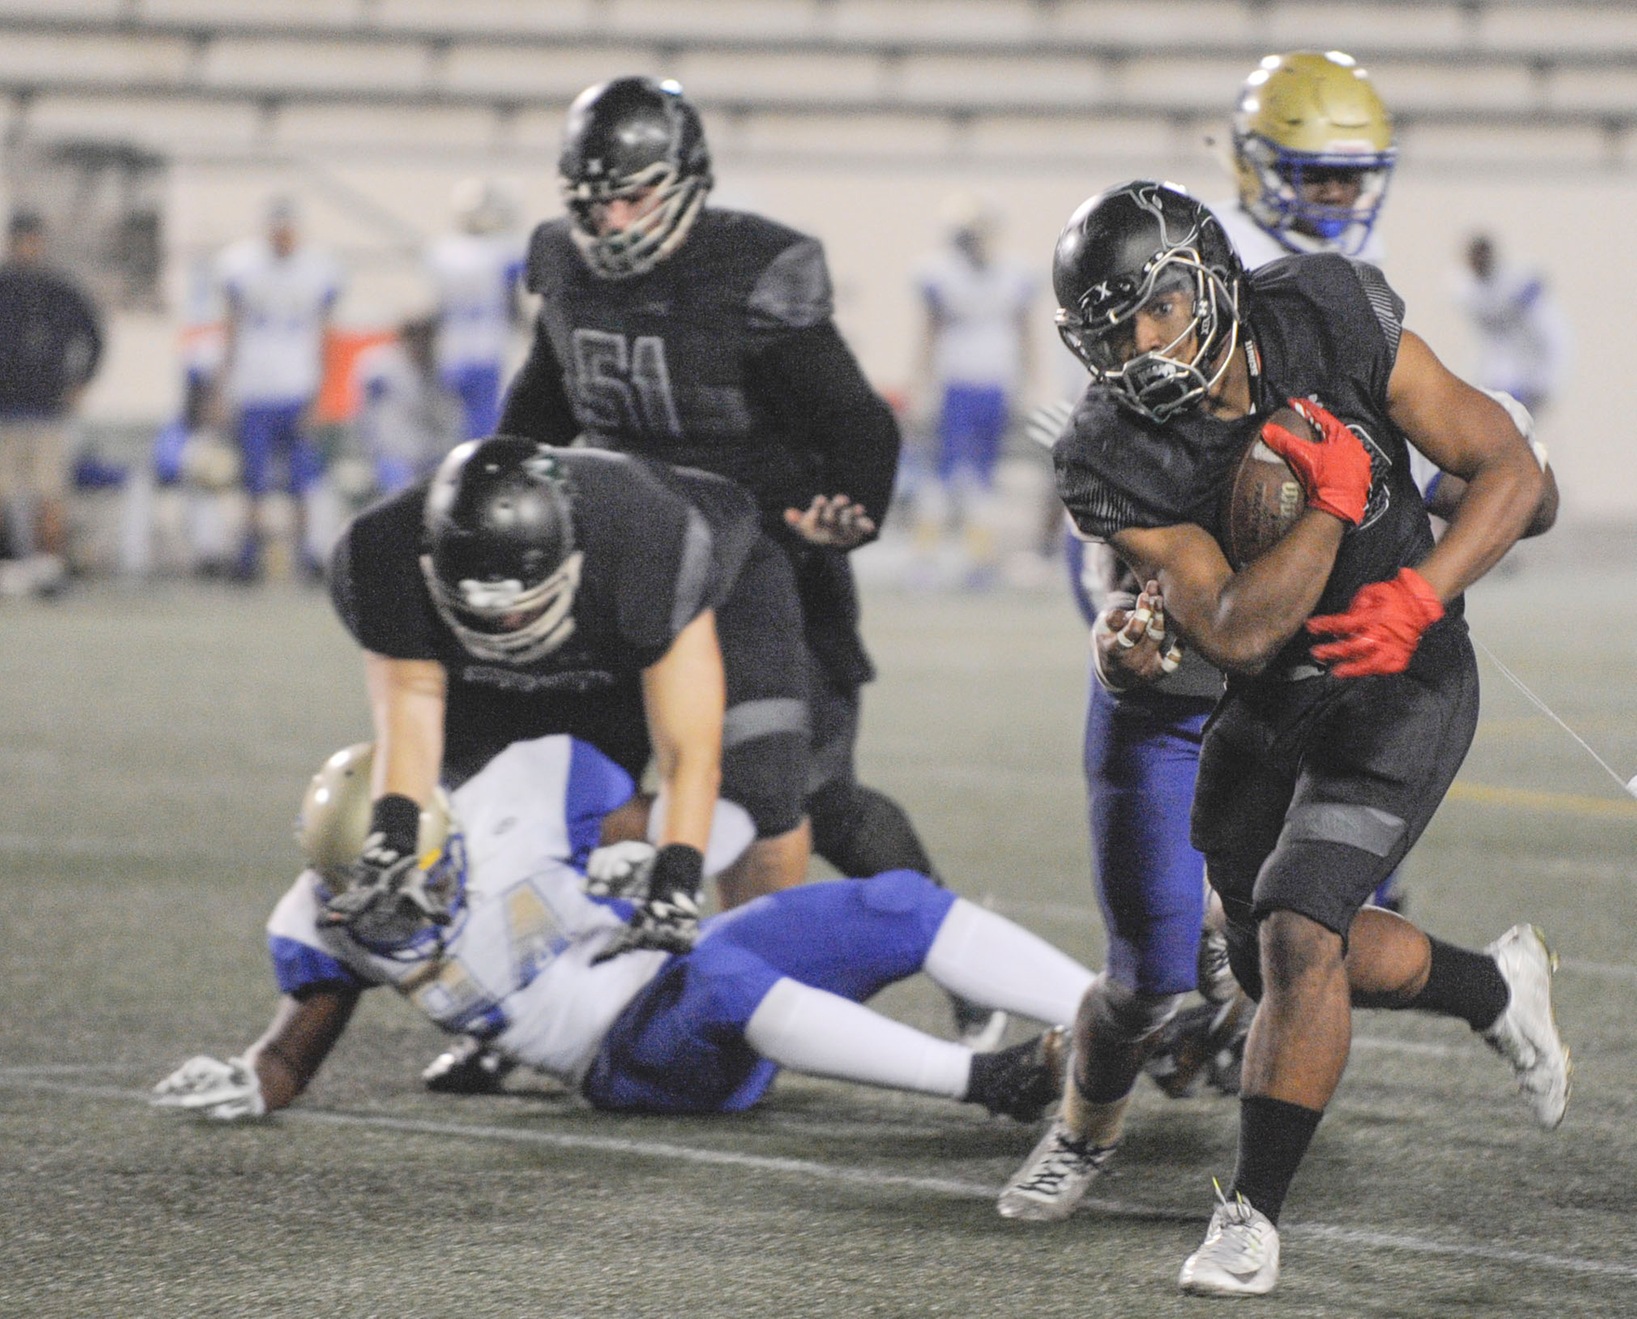 East Los Angeles College sophomore running back Nicholas Hutson breaks away for a 13-yard run in a 35-17 football win over West Los Angeles College. (Photo by Tadzio Garcia)